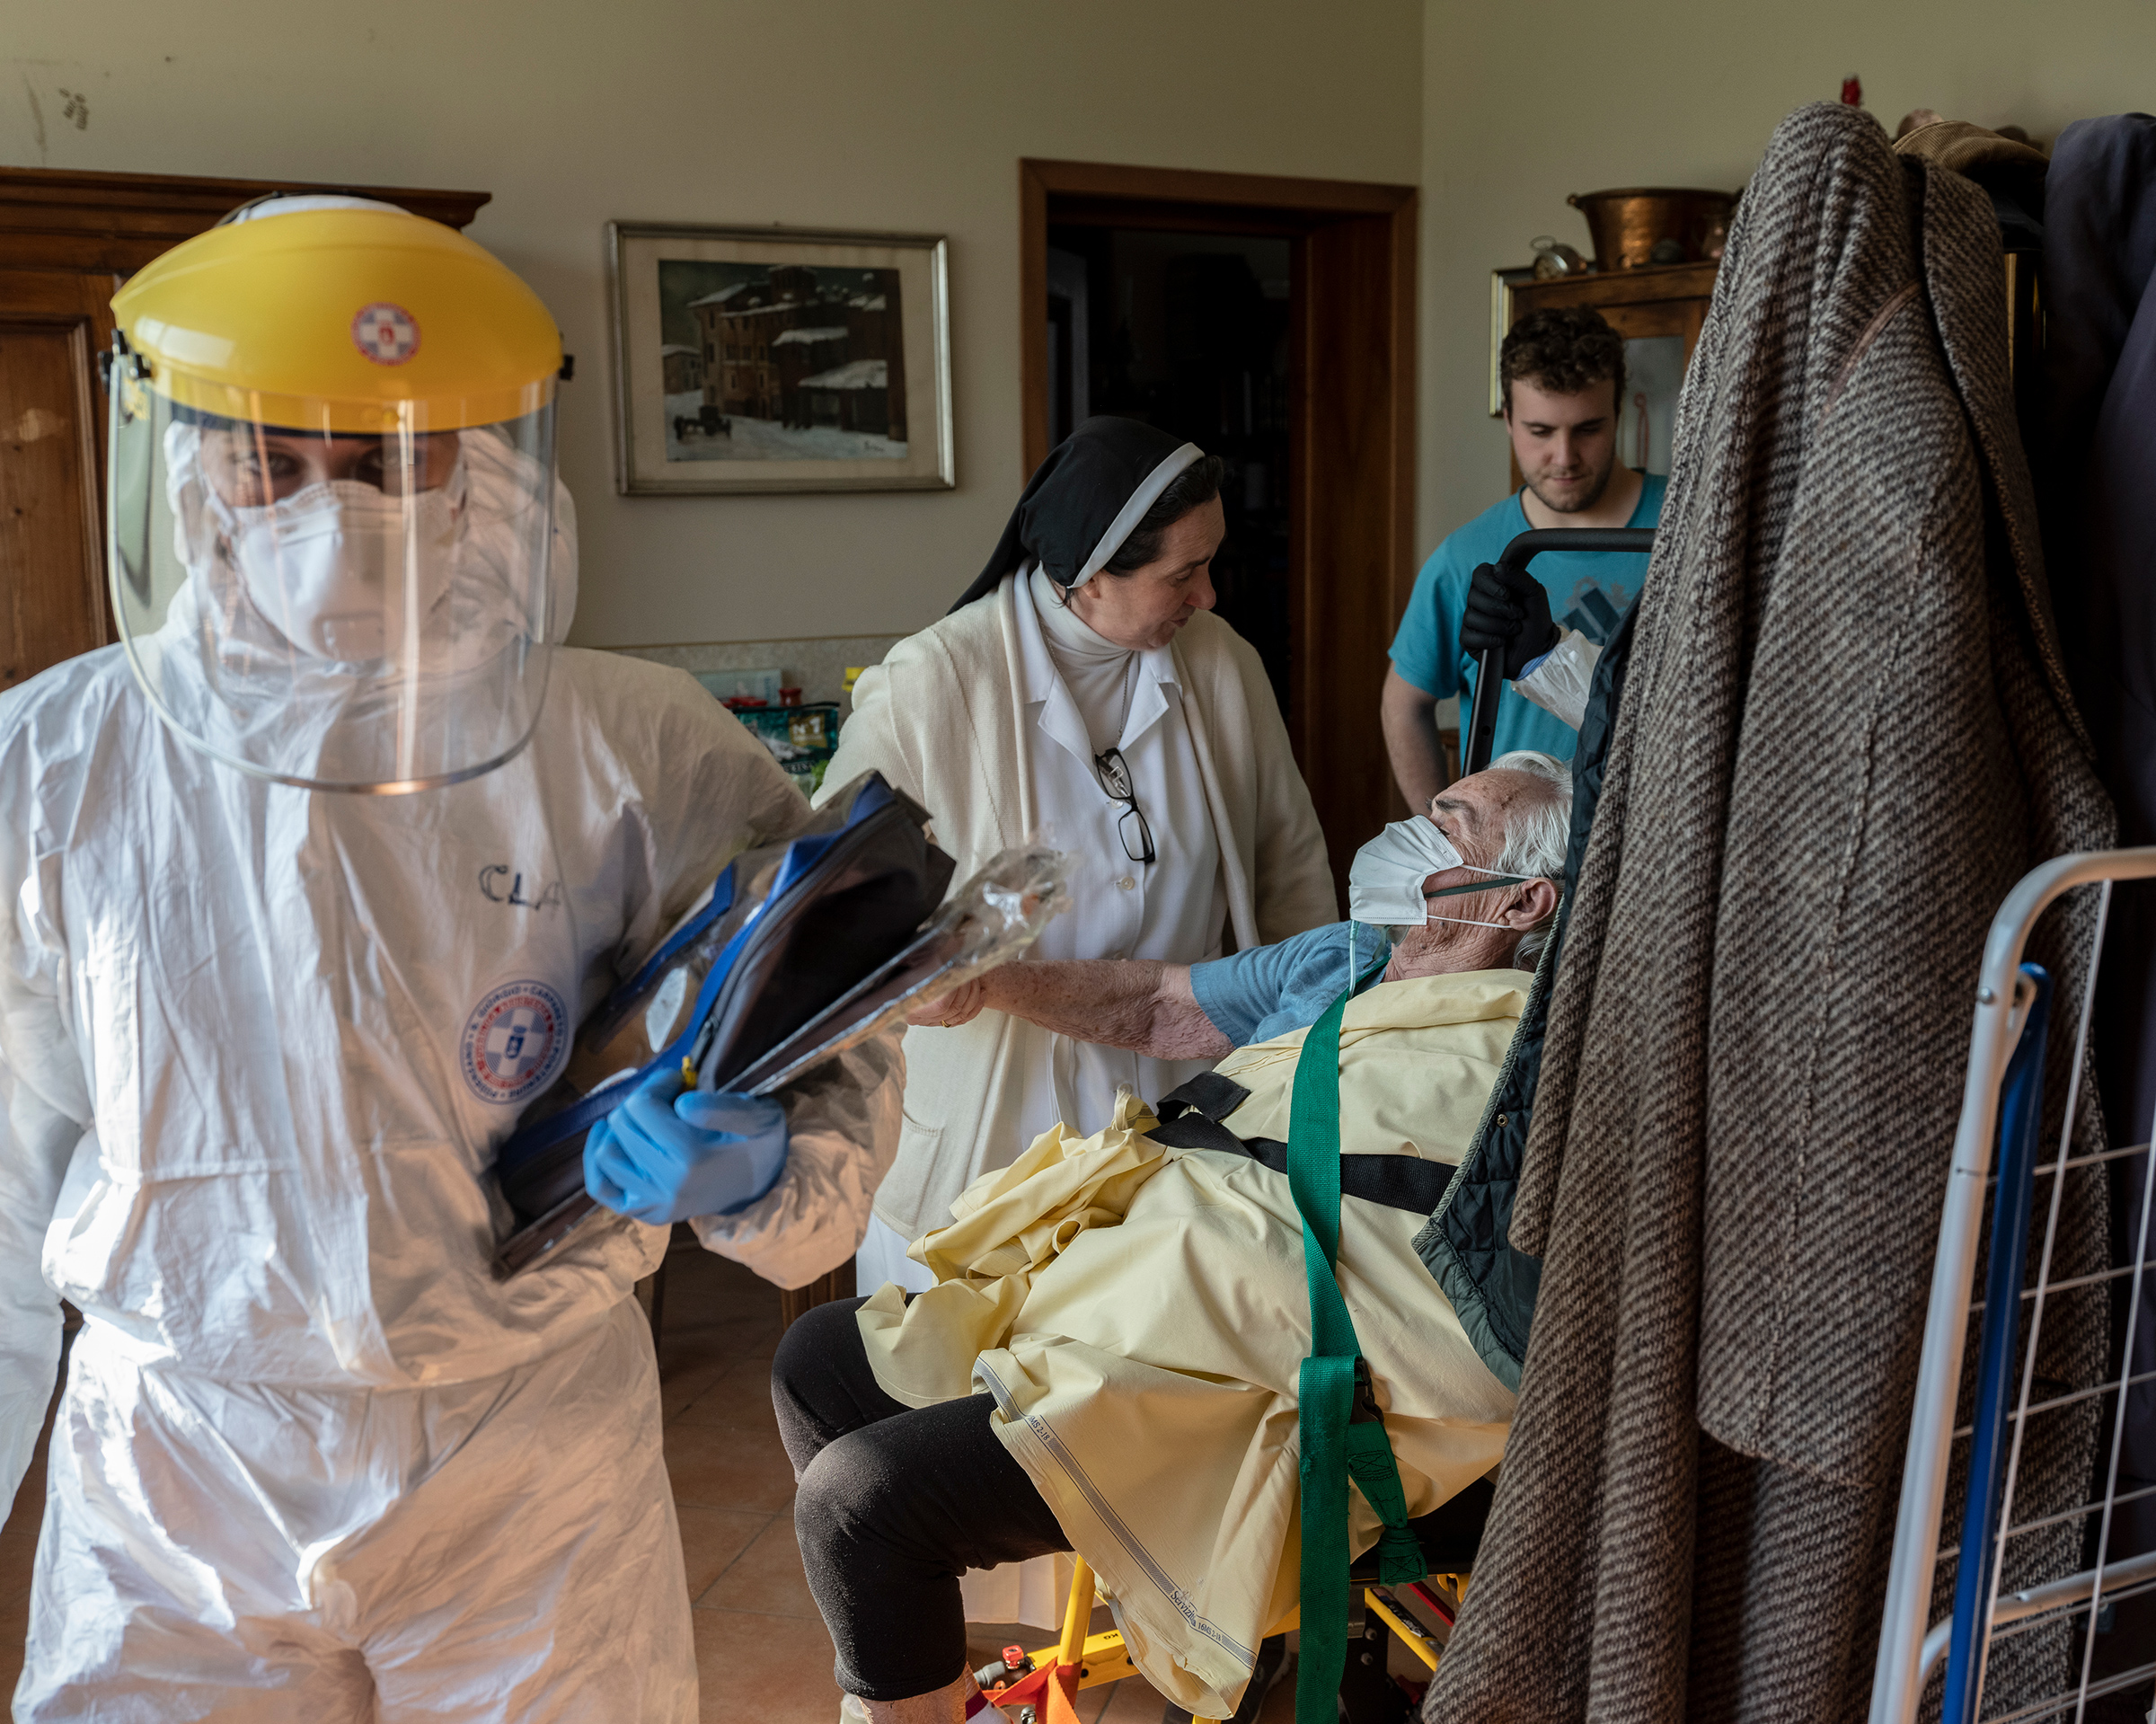 After an assessment by health workers on the outskirts of Piacenza, an elderly woman experiencing COVID-19 symptoms is taken to a hospital. Her daughter, a nun, helps the rescuers. (Lorenzo Meloni—Magnum Photos for TIME)